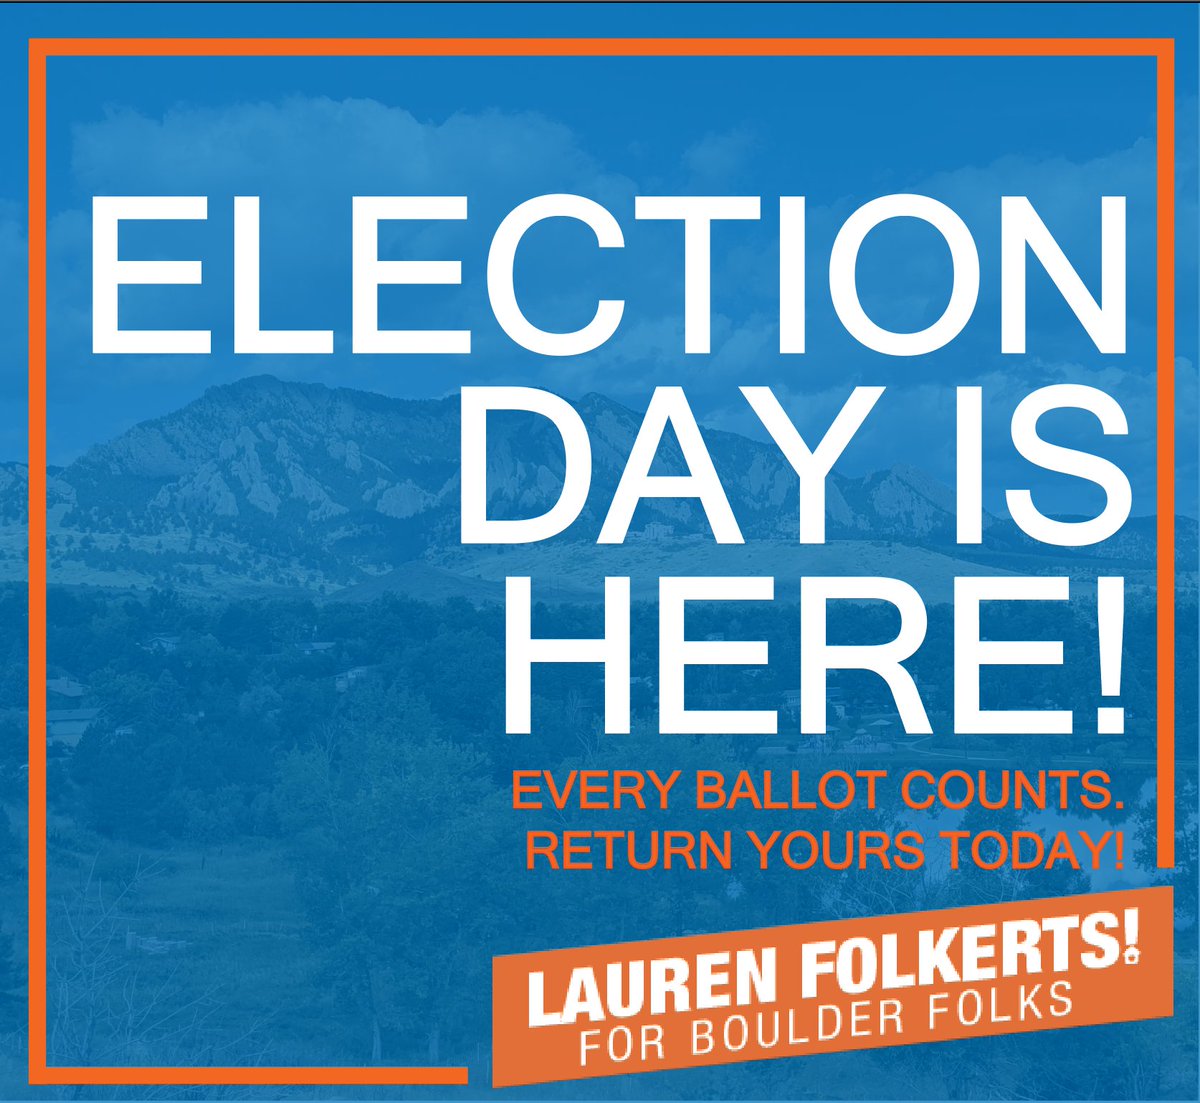 TODAY IS THE DAY! Return your ballot by 7pm to ensure your vote is counted. To confirm a drop off and/or polling location, check out Boulder Elections FAQ page: bouldercolorado.gov/services/votin…